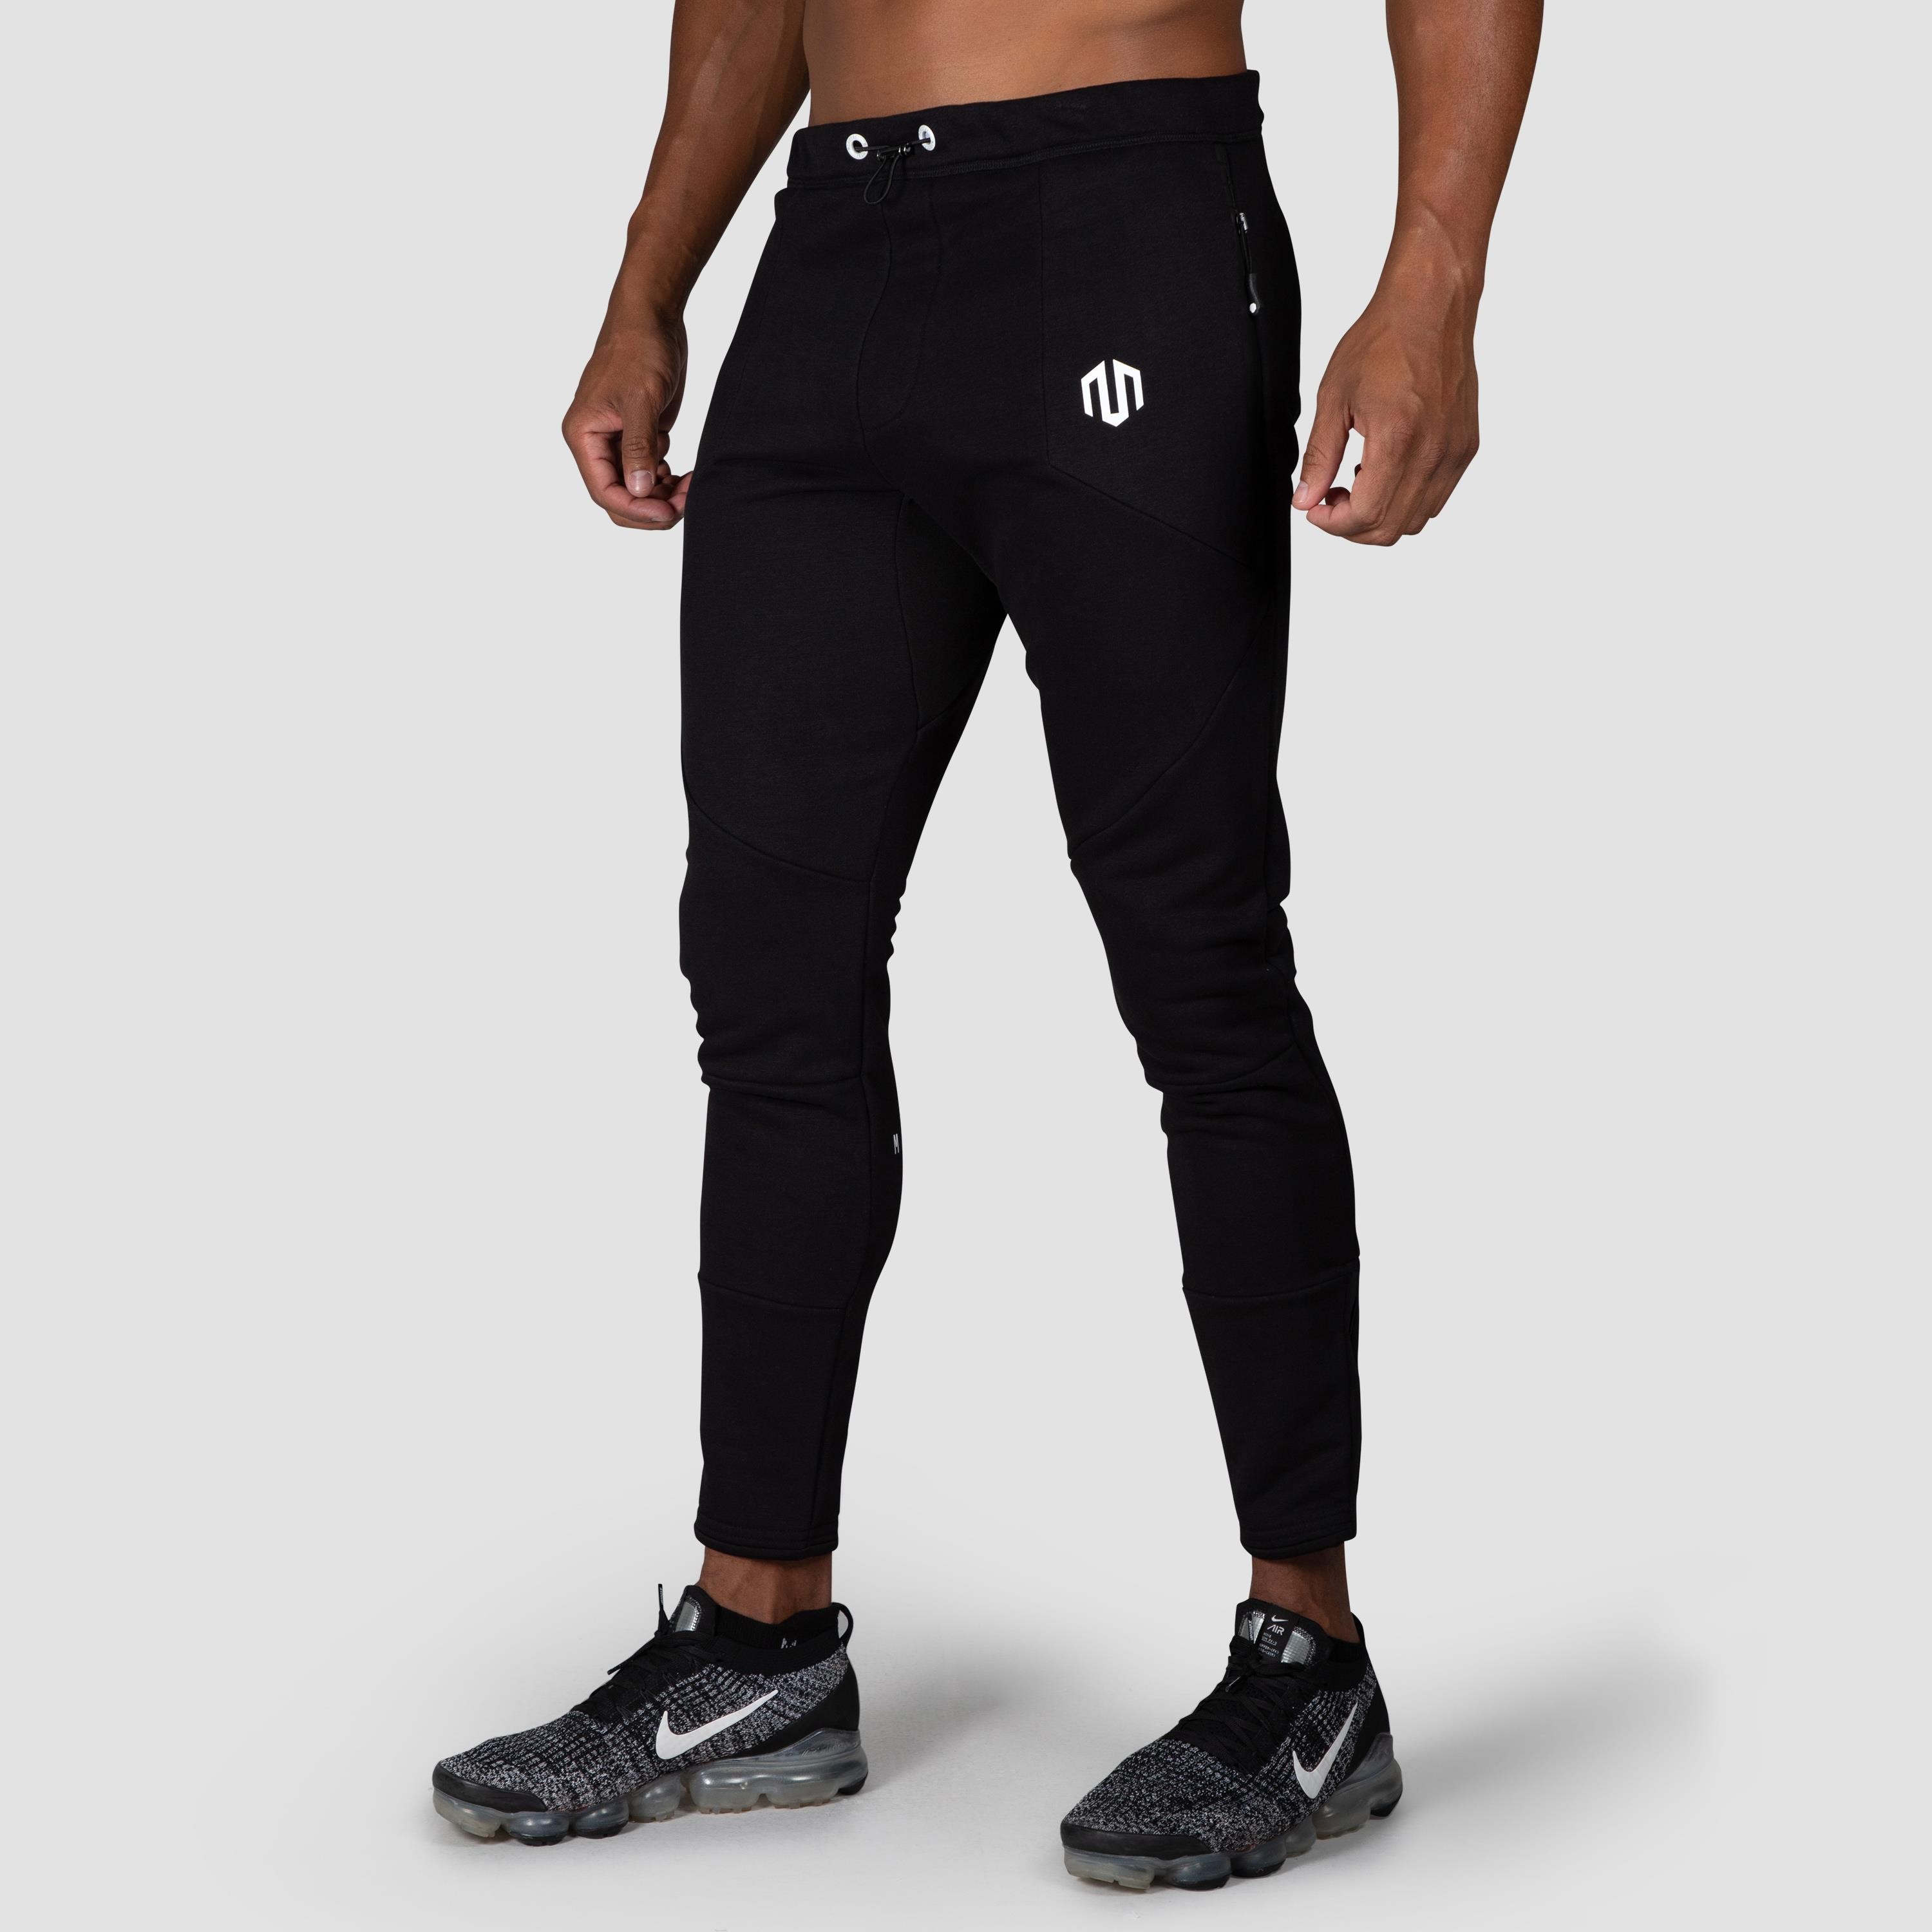 NKMR Neotech Sweatpants main variant image